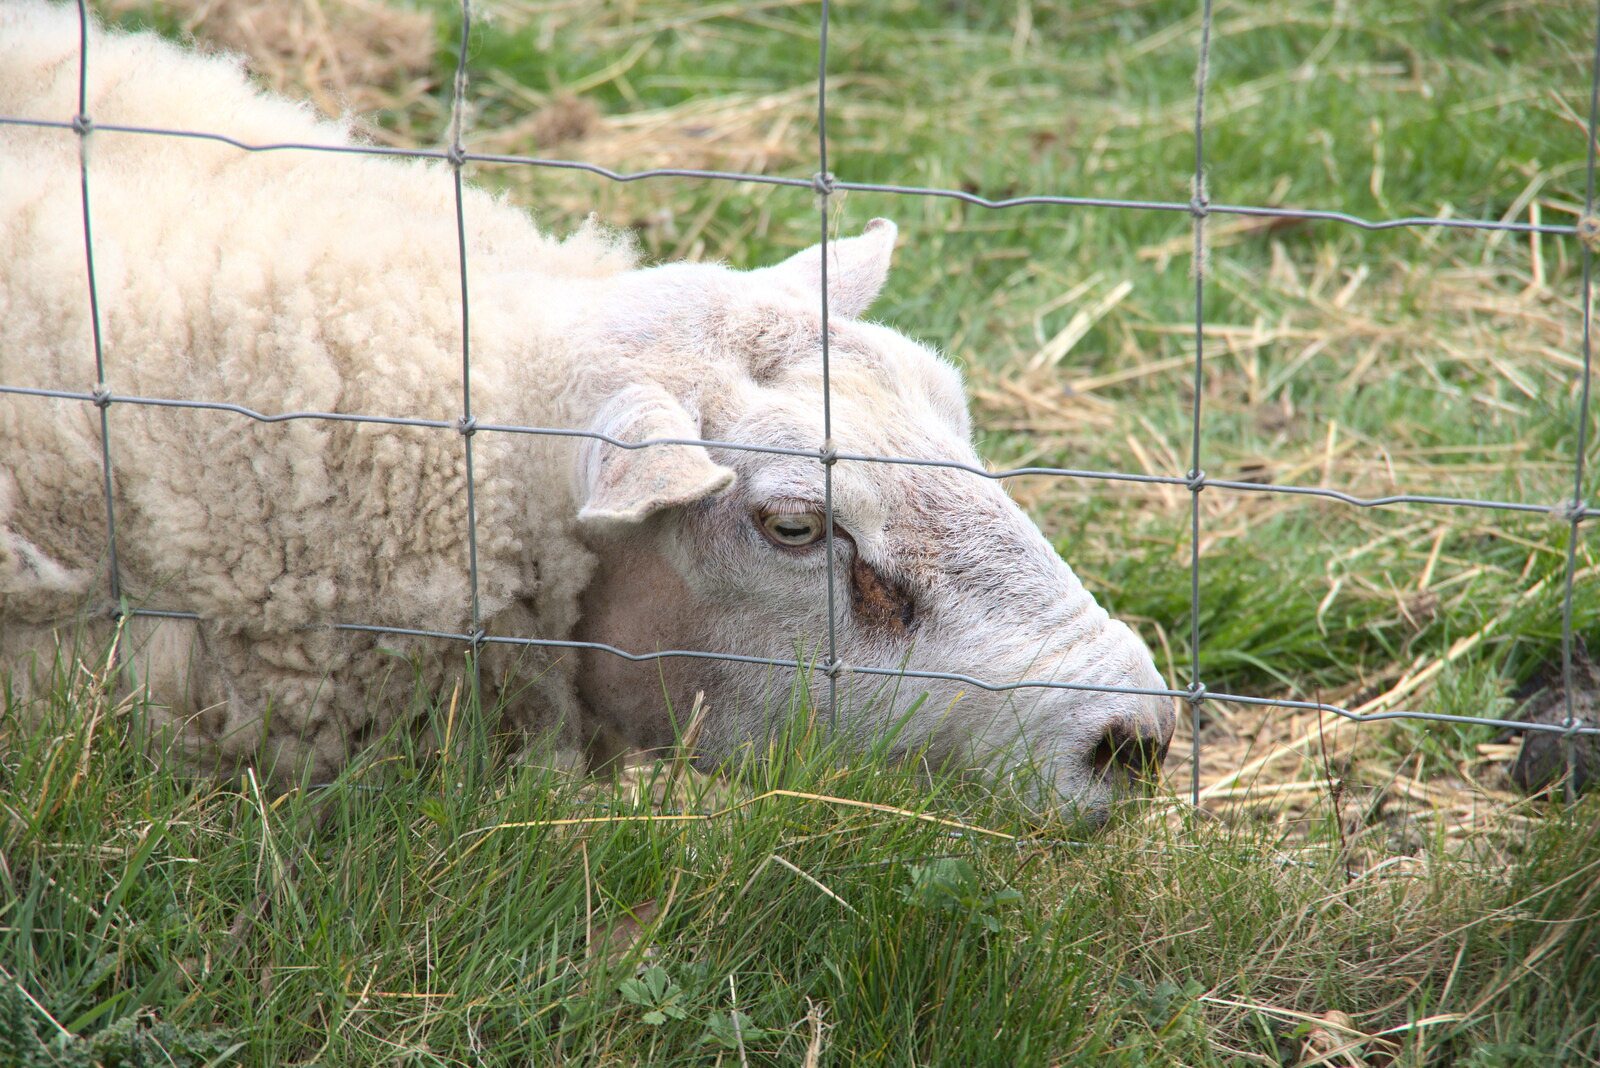 A Camper-Van Trip, West Harling, Norfolk - 13th April 2022: A square-eyed sheep in a field